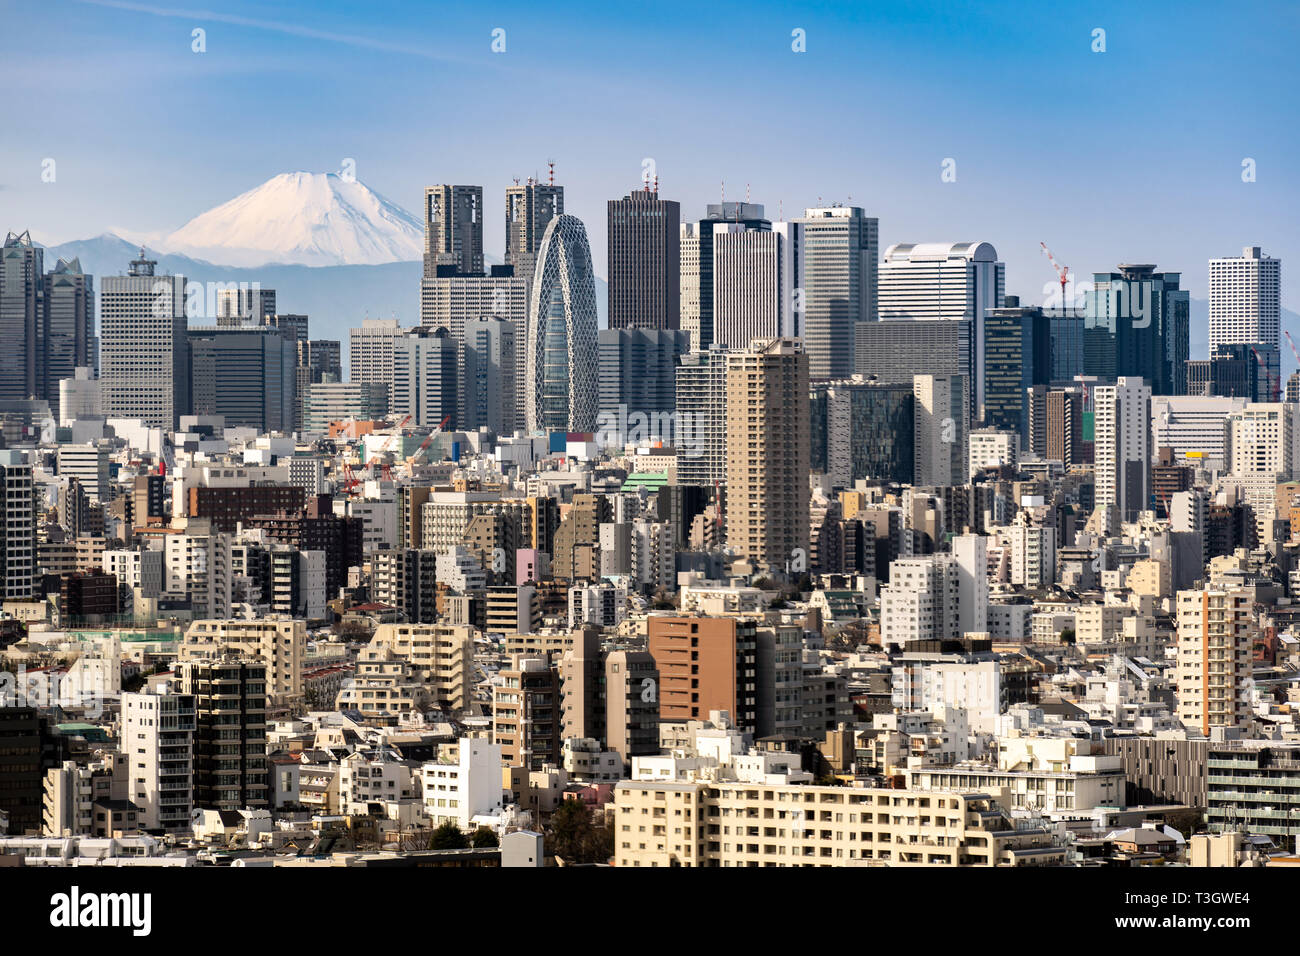 Mountain Fuji with Tokyo skylines and skyscrapers buildings in Shinjuku ward in Tokyo. Taken from Tokyo Bunkyo civic center observatory sky desk. Stock Photo